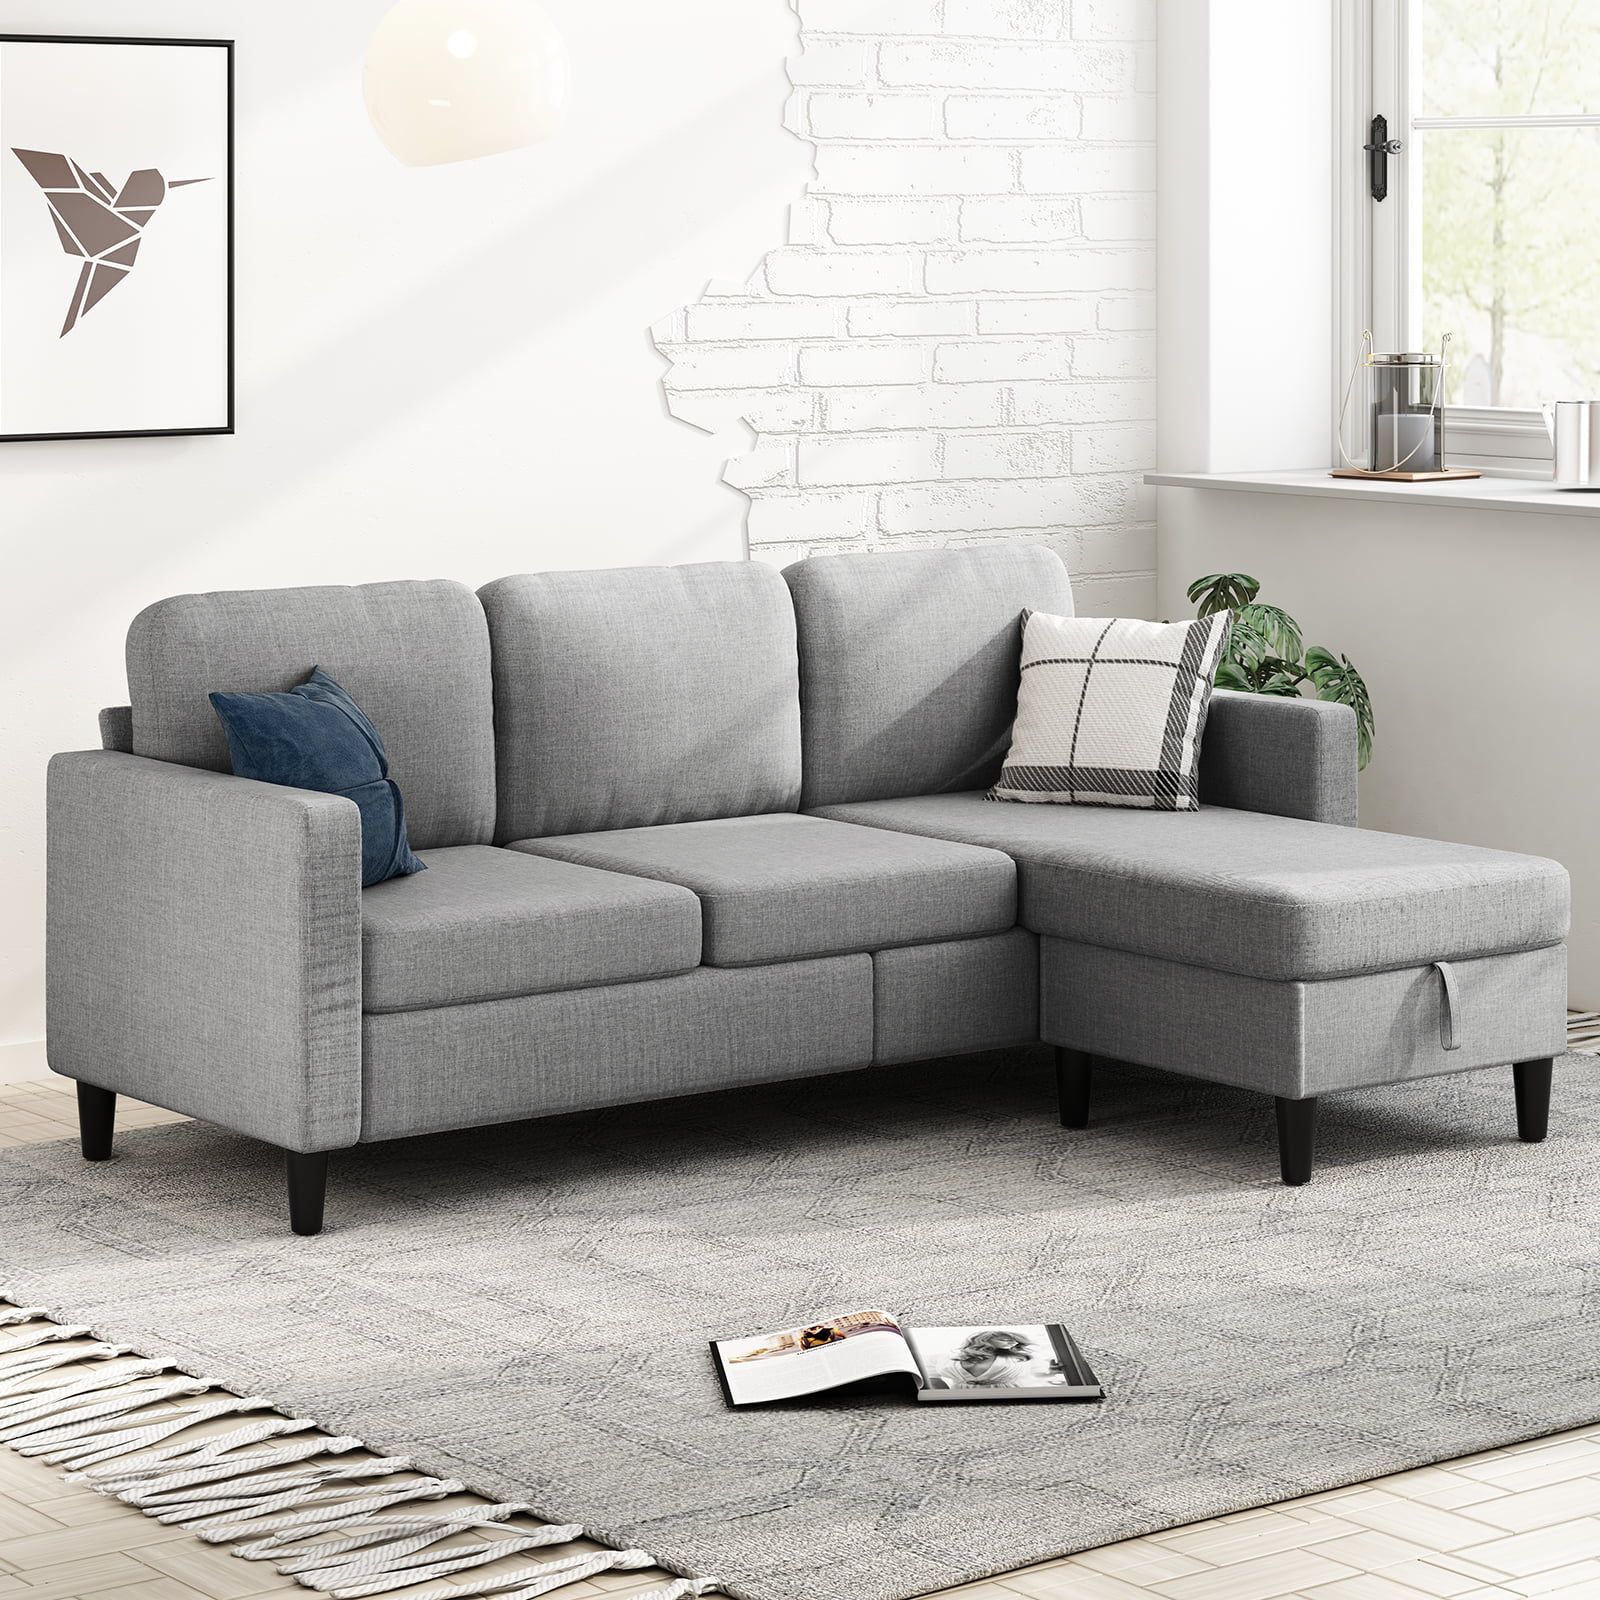 Muzz Sectional Sofa With Movable Ottoman, Free Combination Sectional Couch,  Small L Shaped Sectional Sofa With Storage Ottoman, Modern Linen Fabric  Sofa Set For Living Room (light Grey) – Walmart With Regard To Modern Linen Fabric Sofa Sets (View 3 of 20)